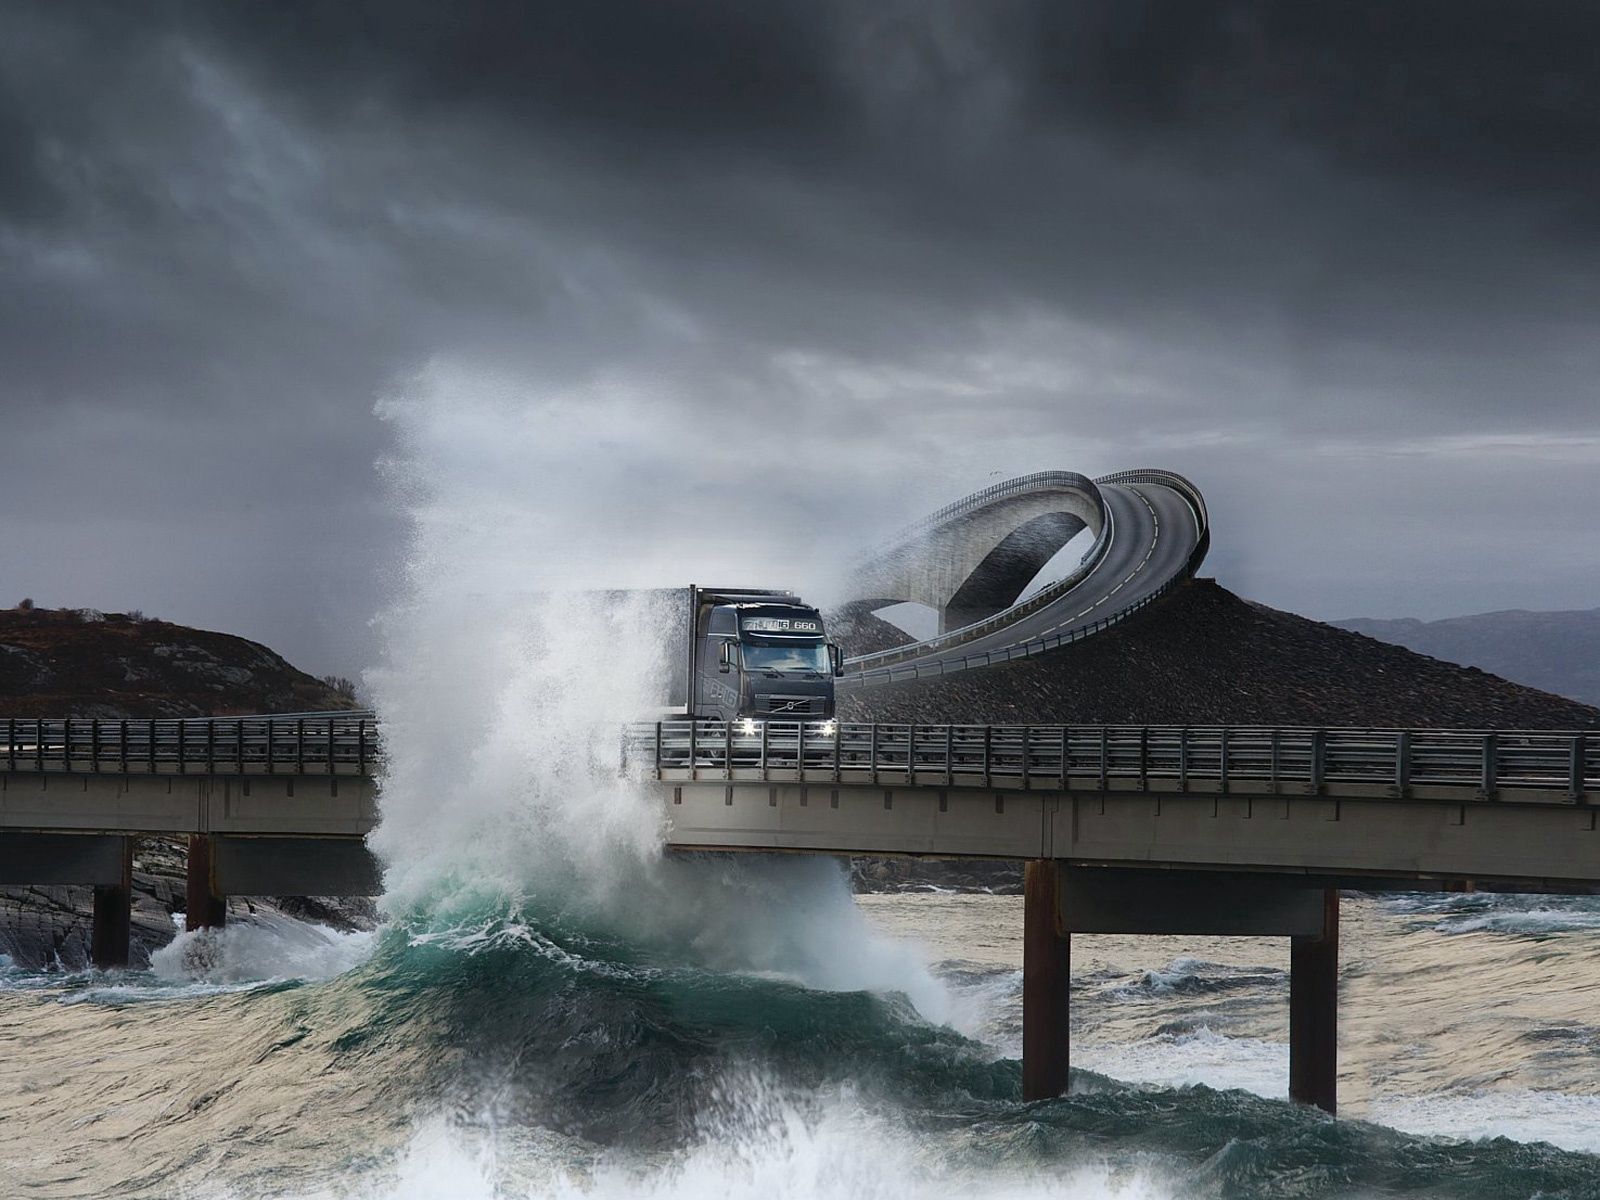 Widescreen image truck, sea, lorry, nature